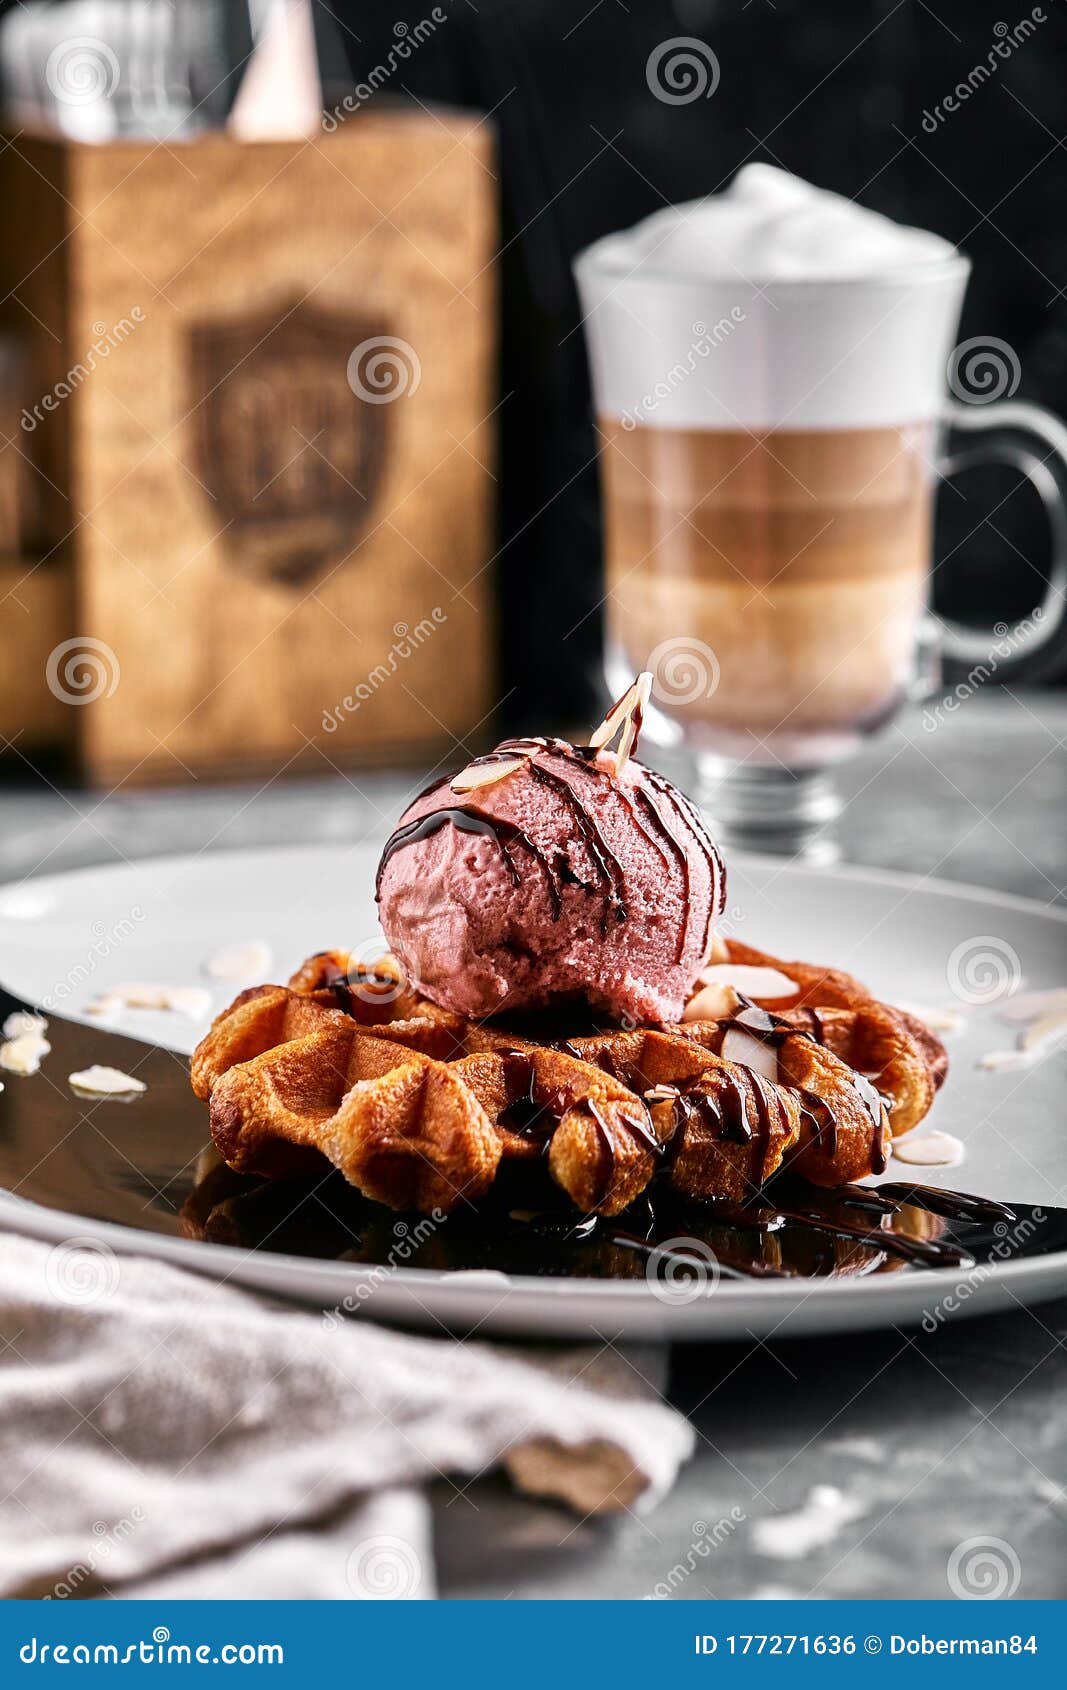 viennese waffles ice cream coffee beautiful picture dessert latte concept sweet life food photo copy space gray 177271636